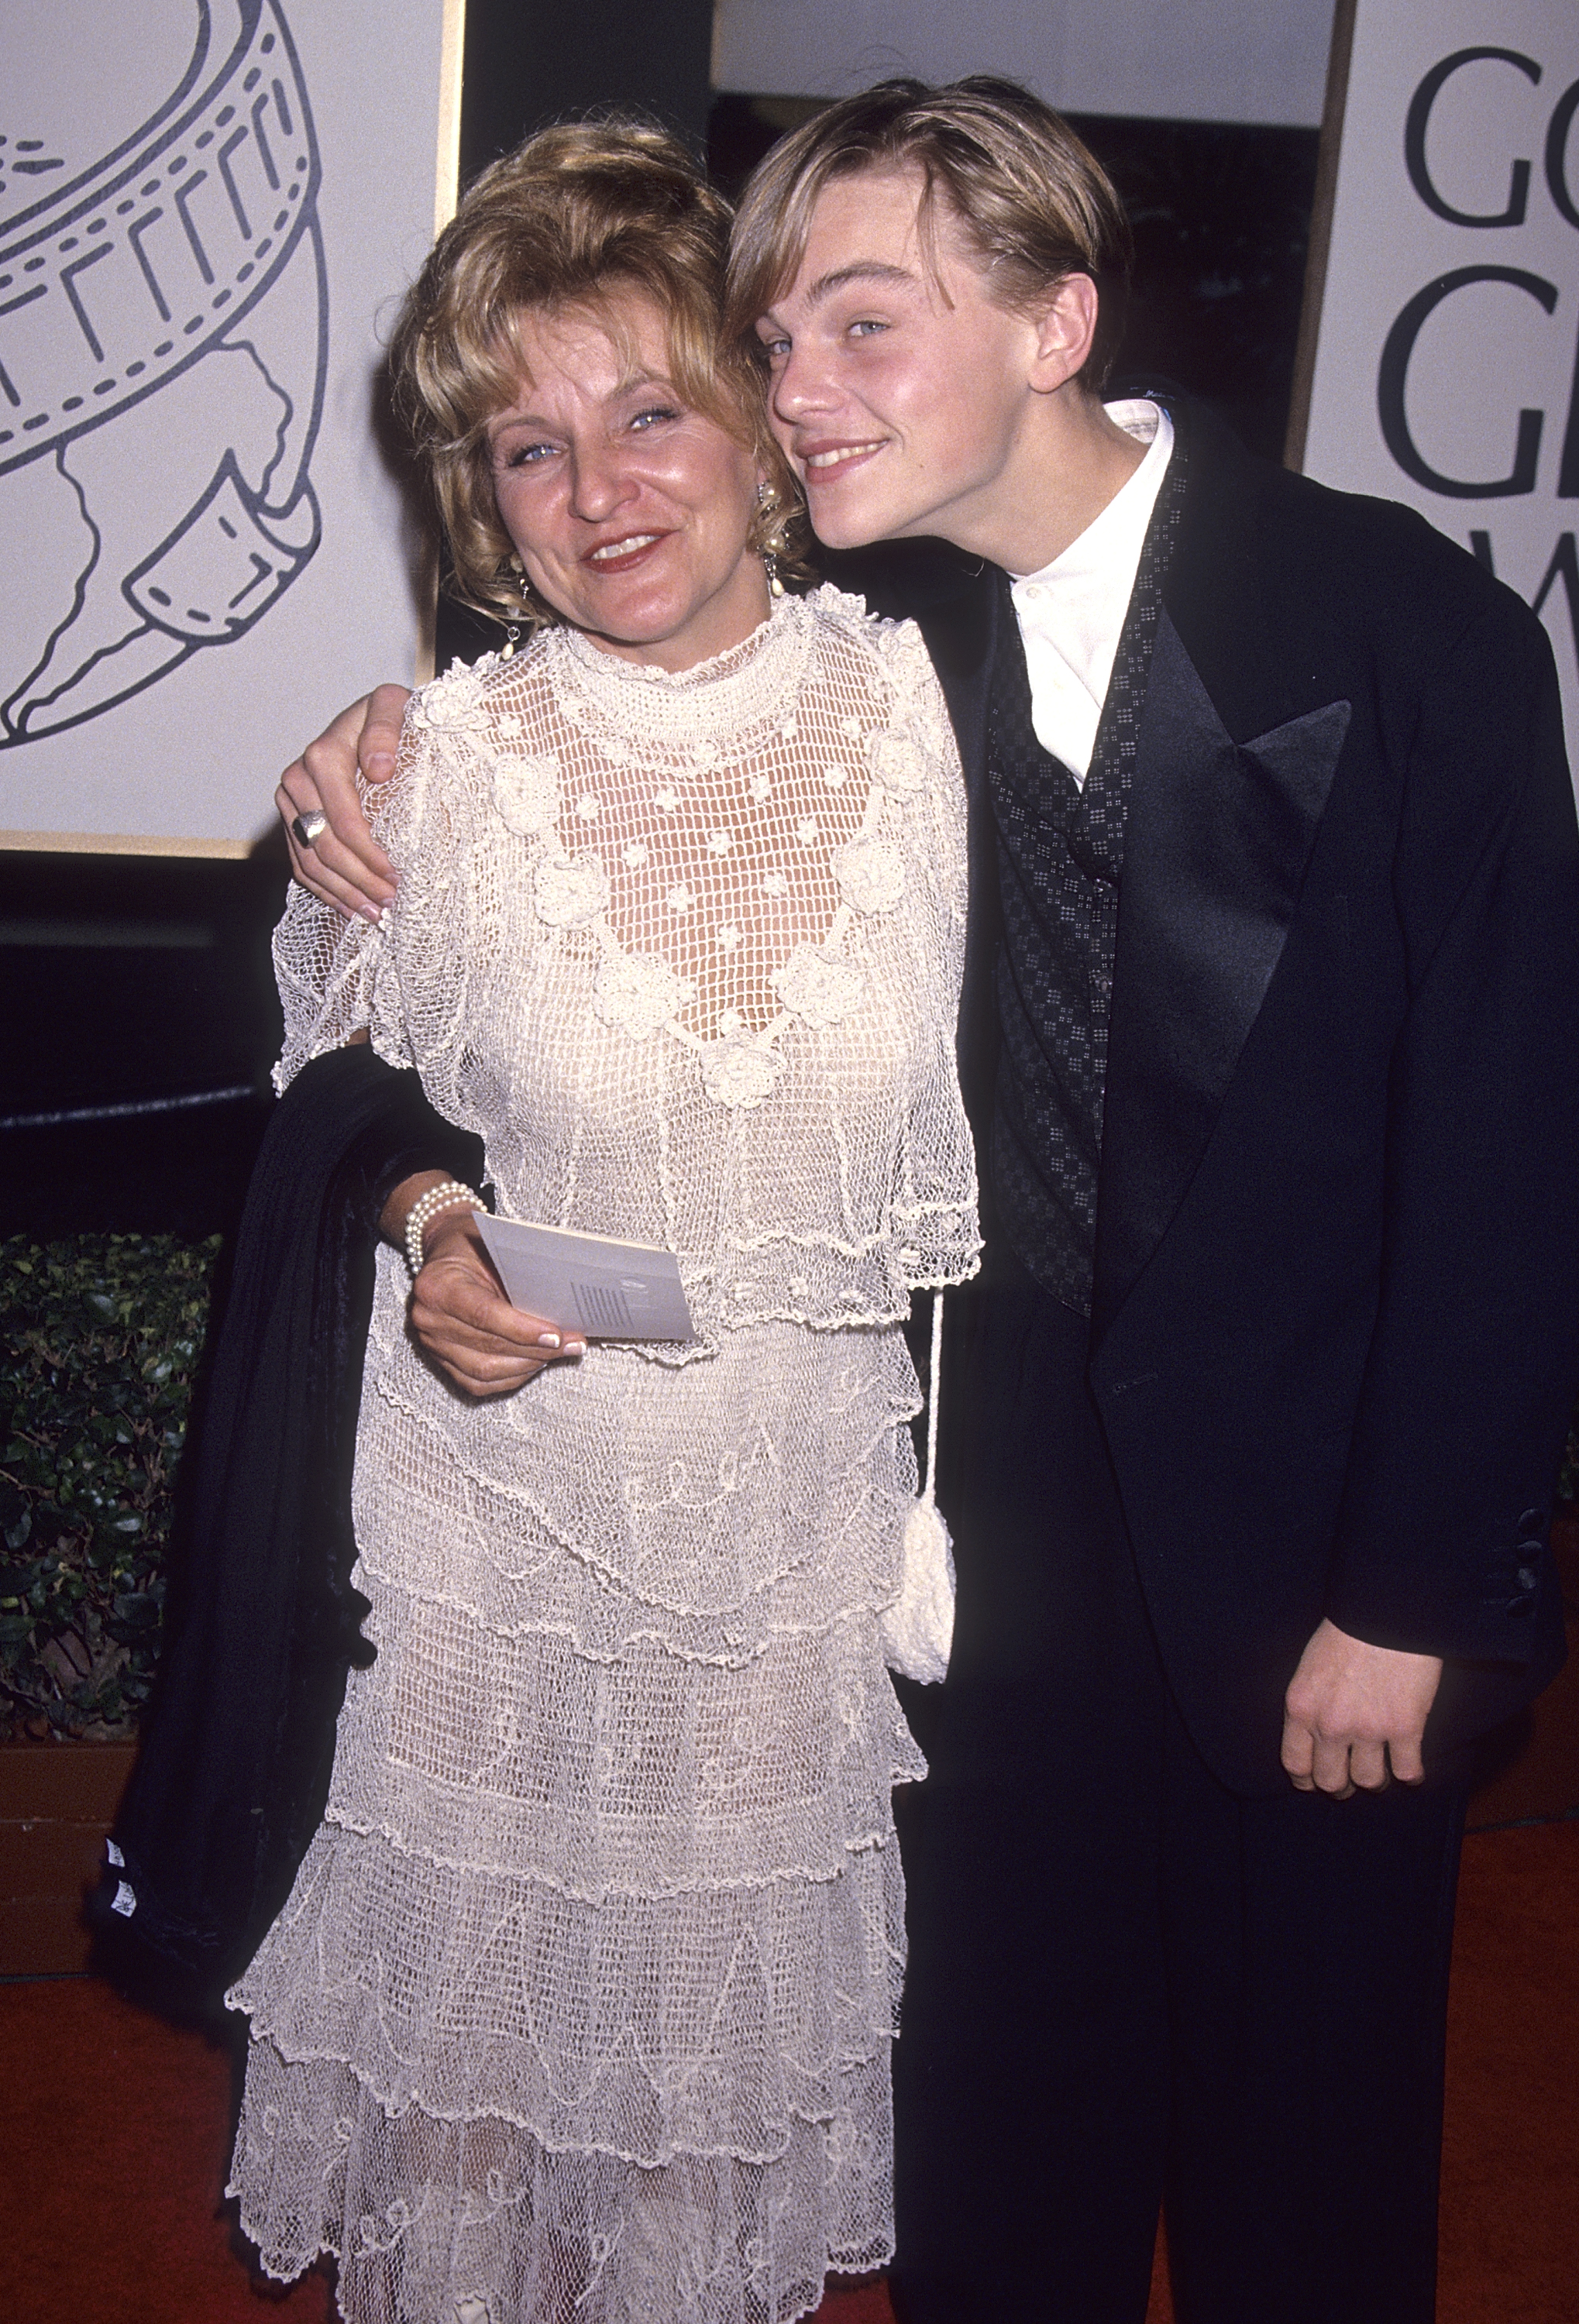 Irmelin Indenbirken and Leonardo DiCaprio attend the 51st Annual Golden Globe Awards in Beverly Hills, California, on January 22, 1994. | Source: Getty Images